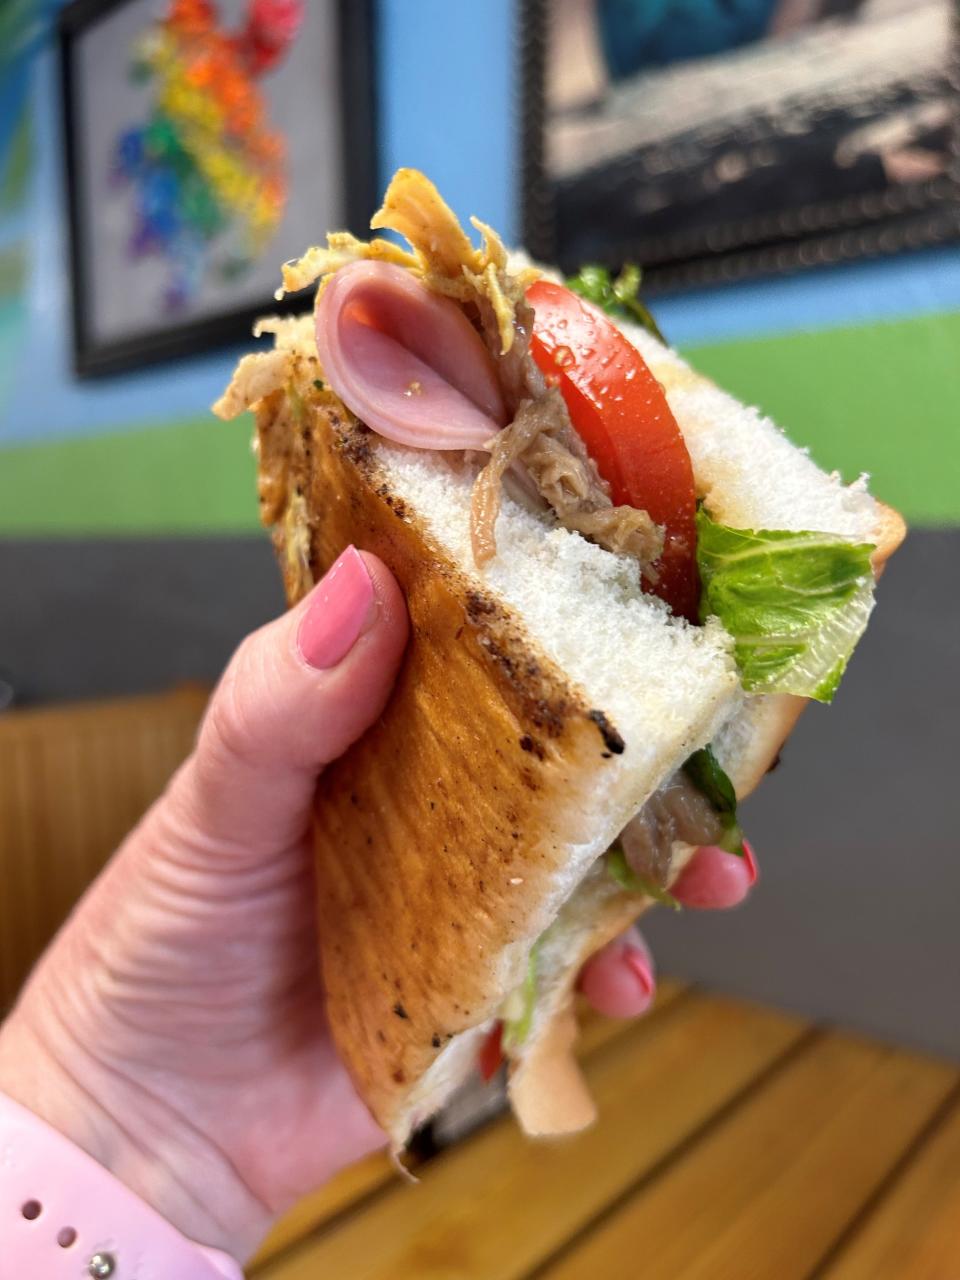 The Tripleta Sandwich at the Tiny Turtle in Cocoa Beach features roasted island pork, braised island chicken, savory sweet ham, pepper jack cheese, romaine, tomato, potato sticks and Creme Caribe on pressed Puerto Rican sobao bread.